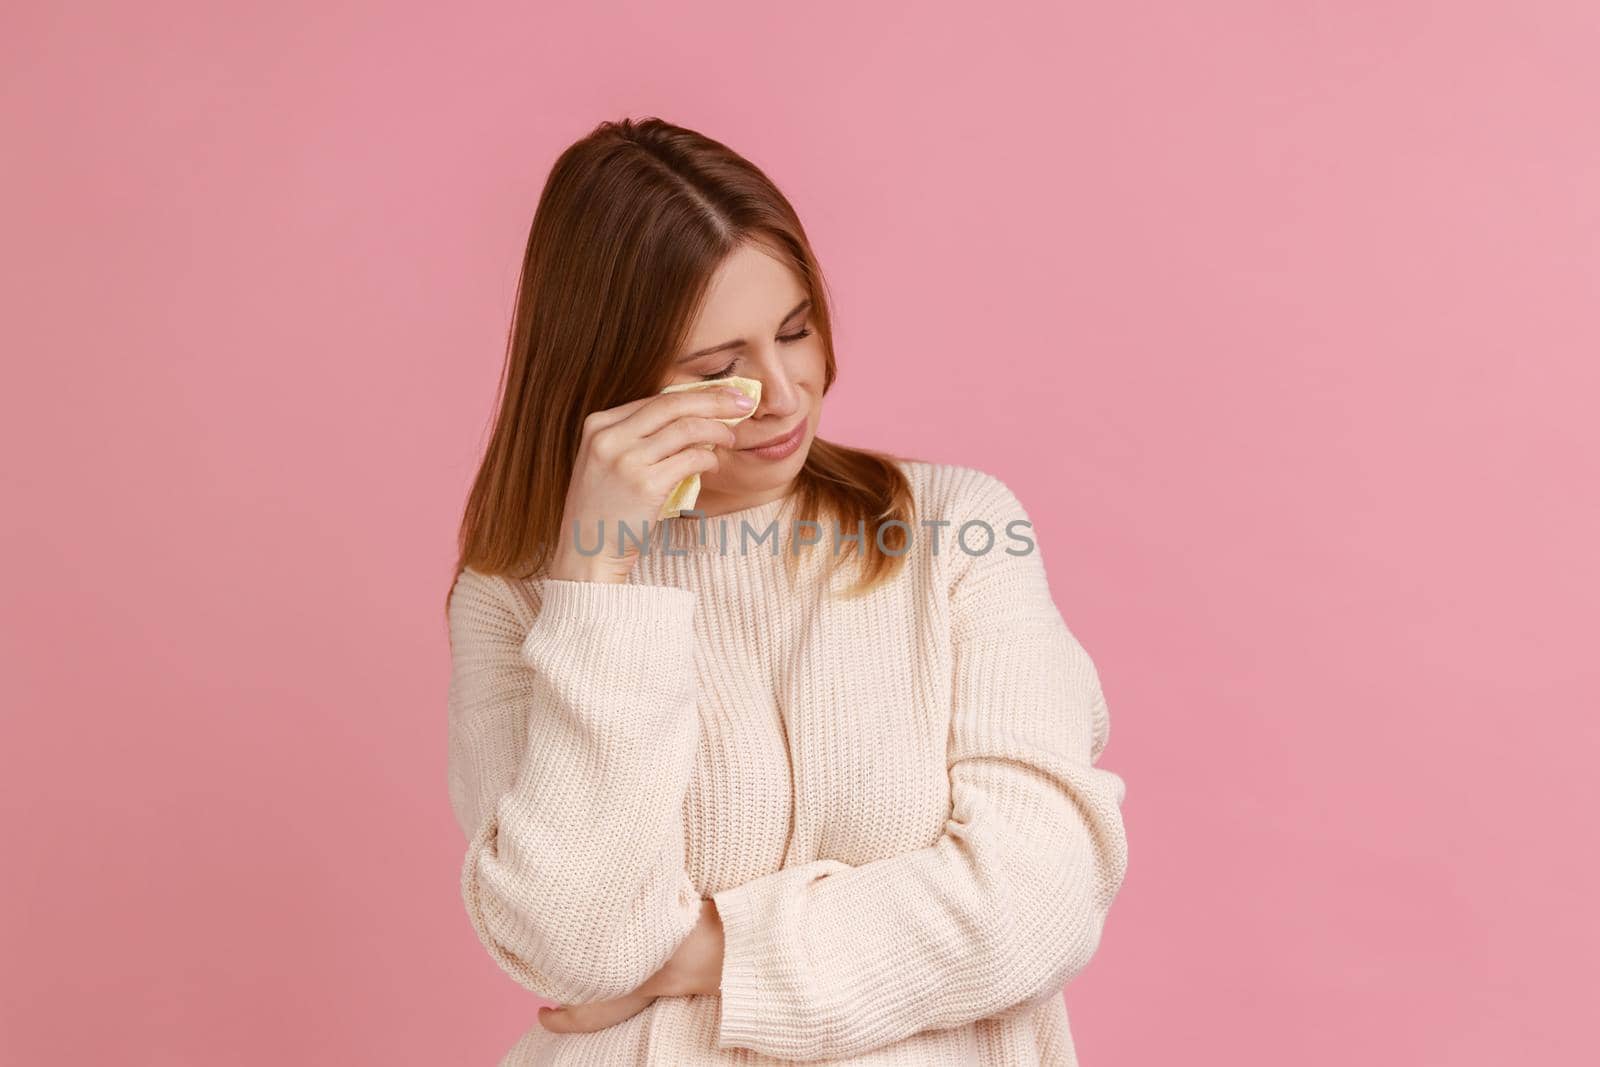 Portrait of blond woman frowning, wiping tears crying, feeling desperate hopeless, coping lonely in emotional stress, wearing white sweater. Indoor studio shot isolated on pink background.